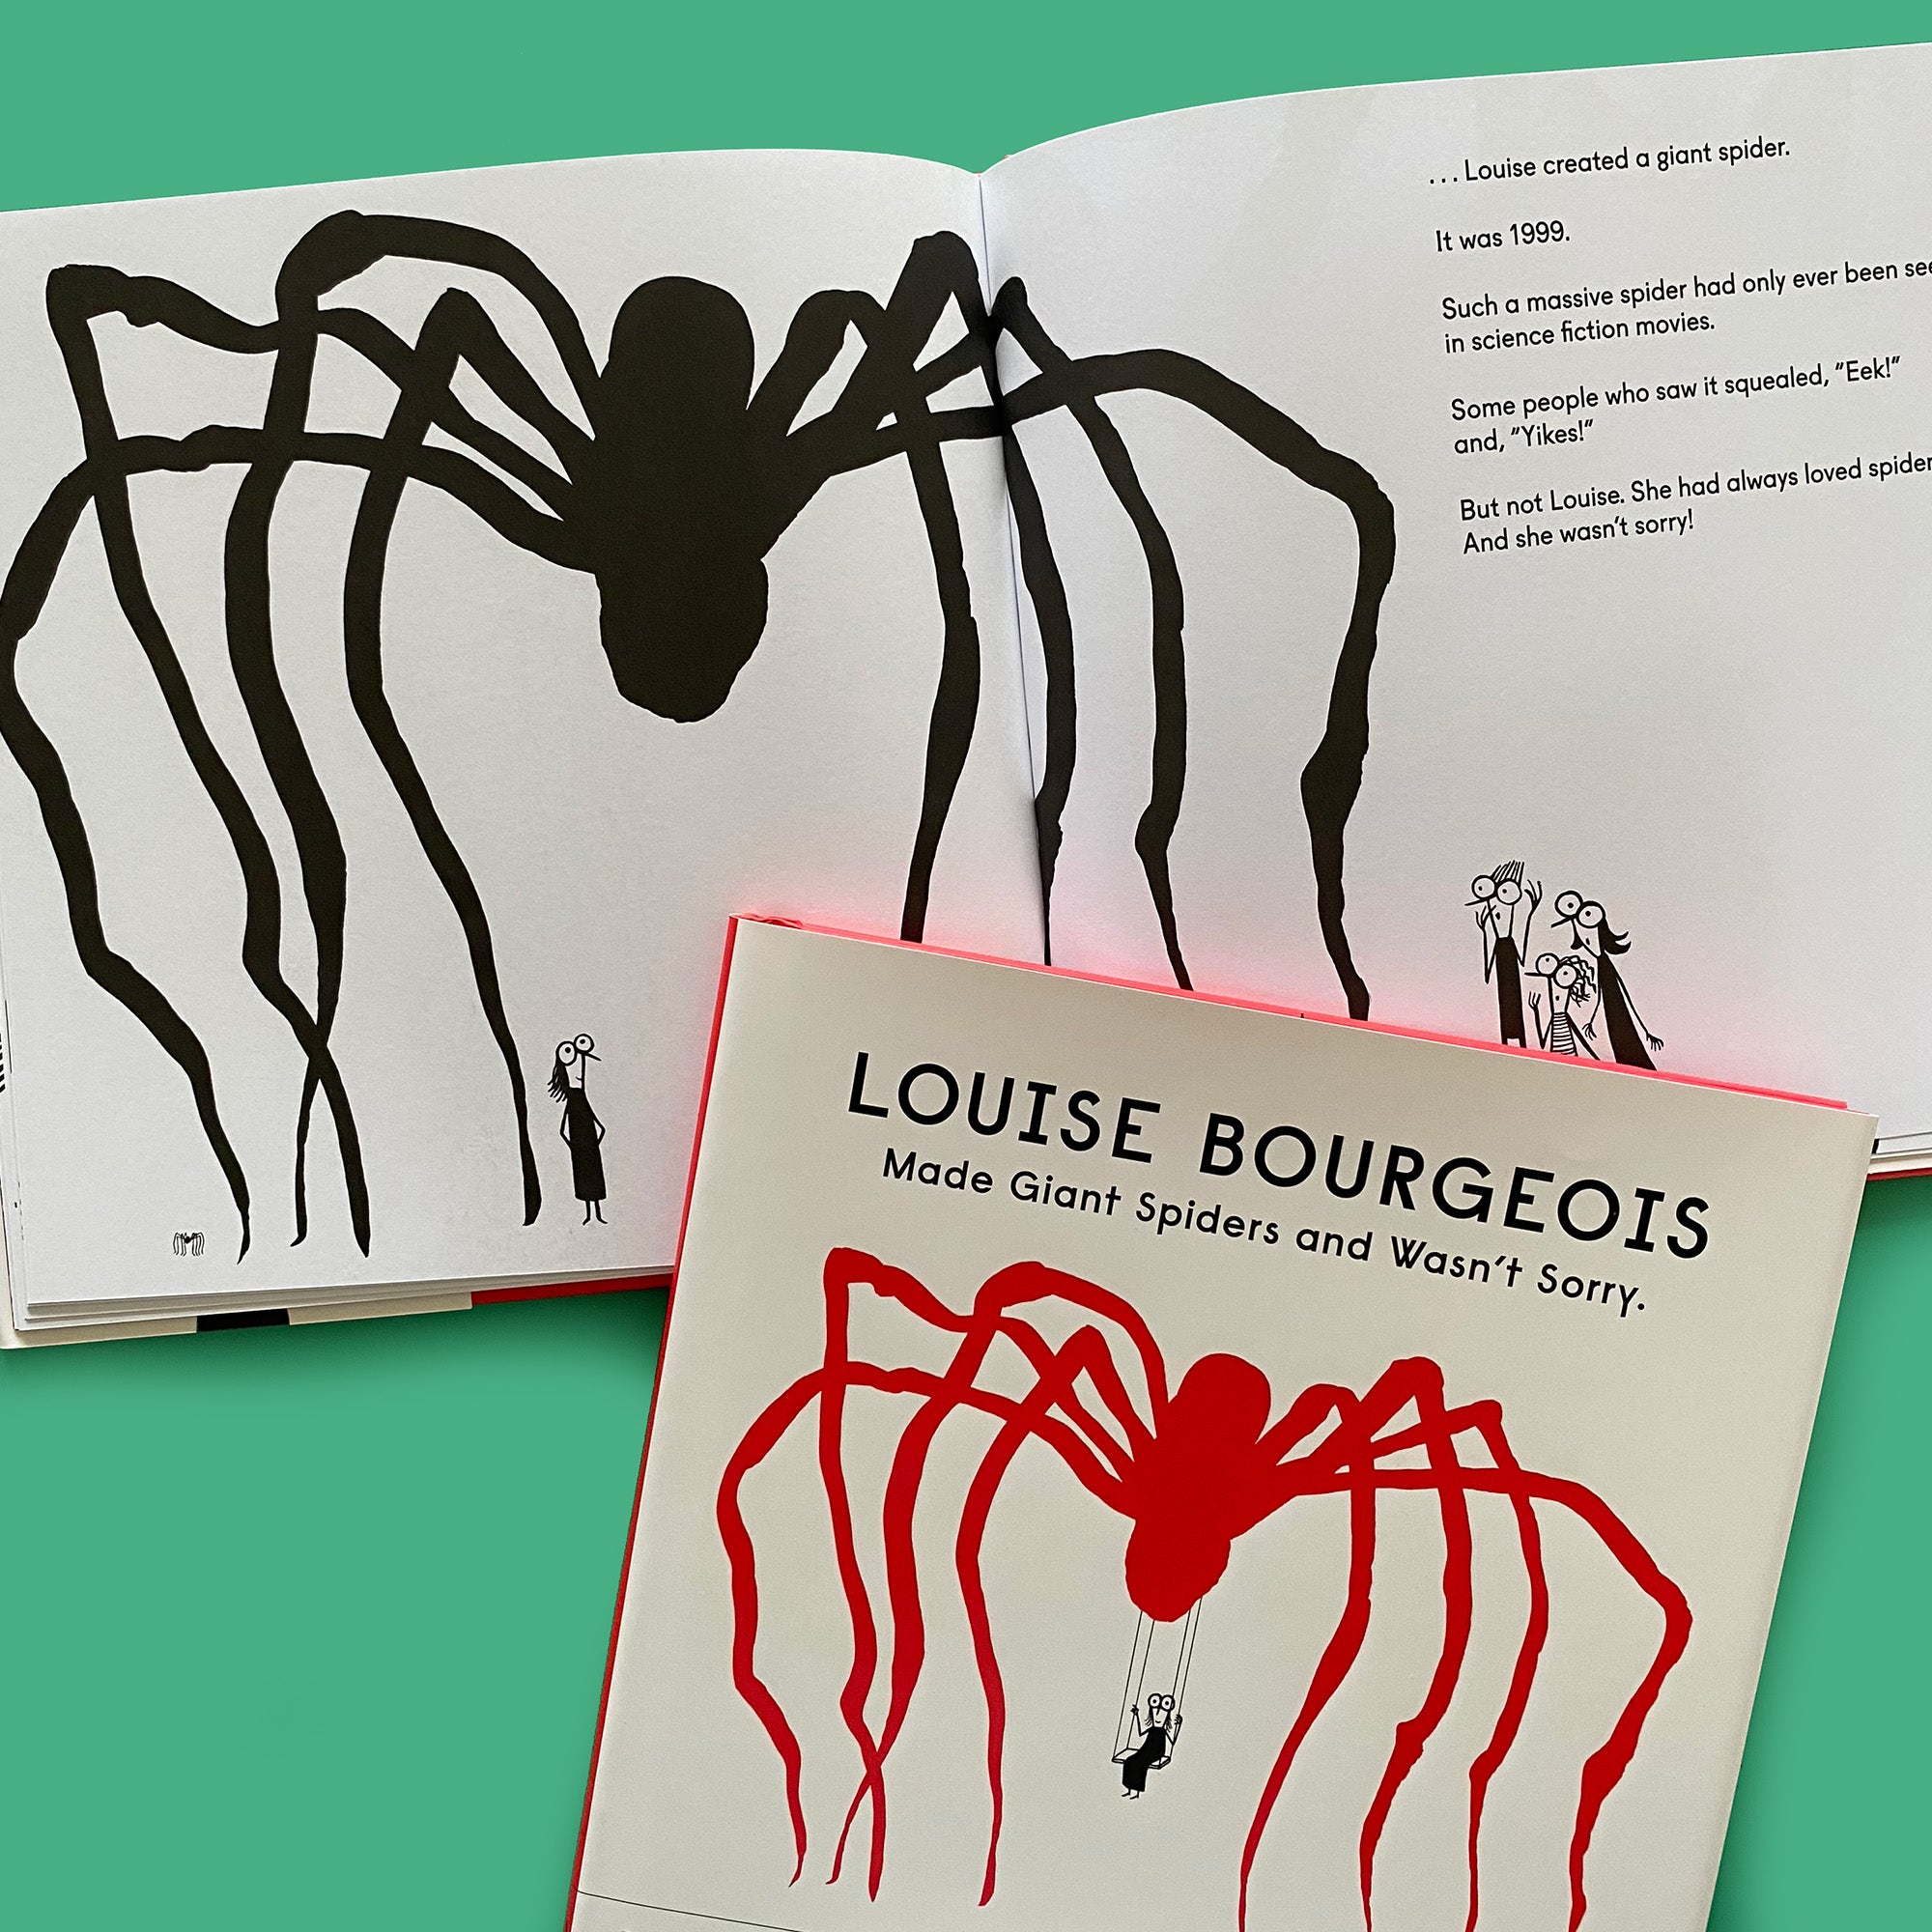 Louise Bourgrois Made Giant Spiders and Wasn't Sorry